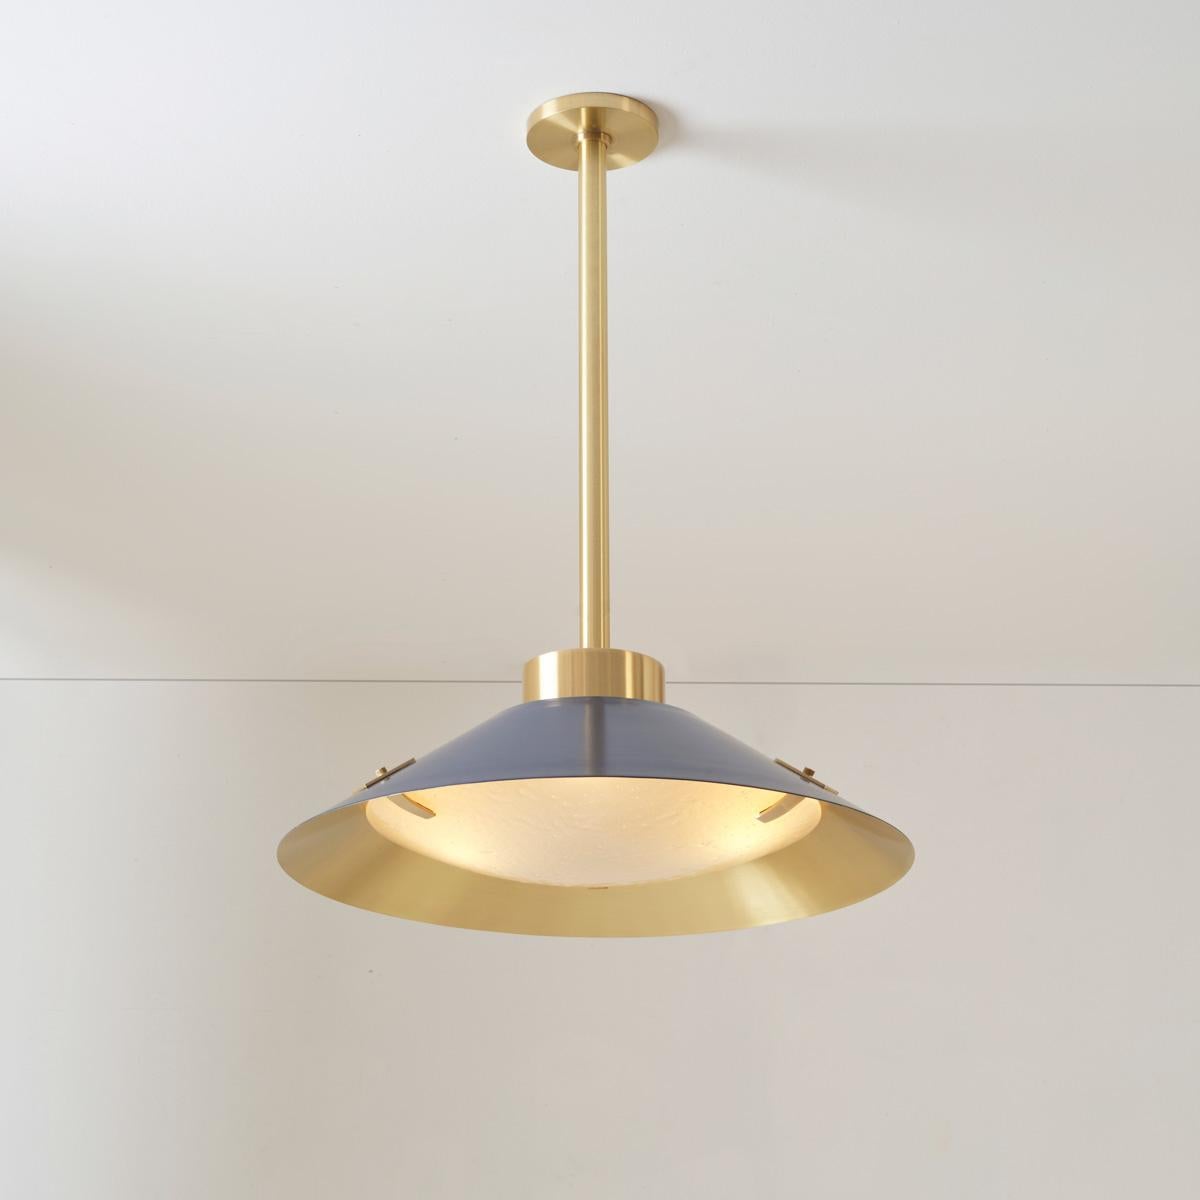 Kono Pendant by Gaspare Asaro. Satin Brass and Stone Grey For Sale 2